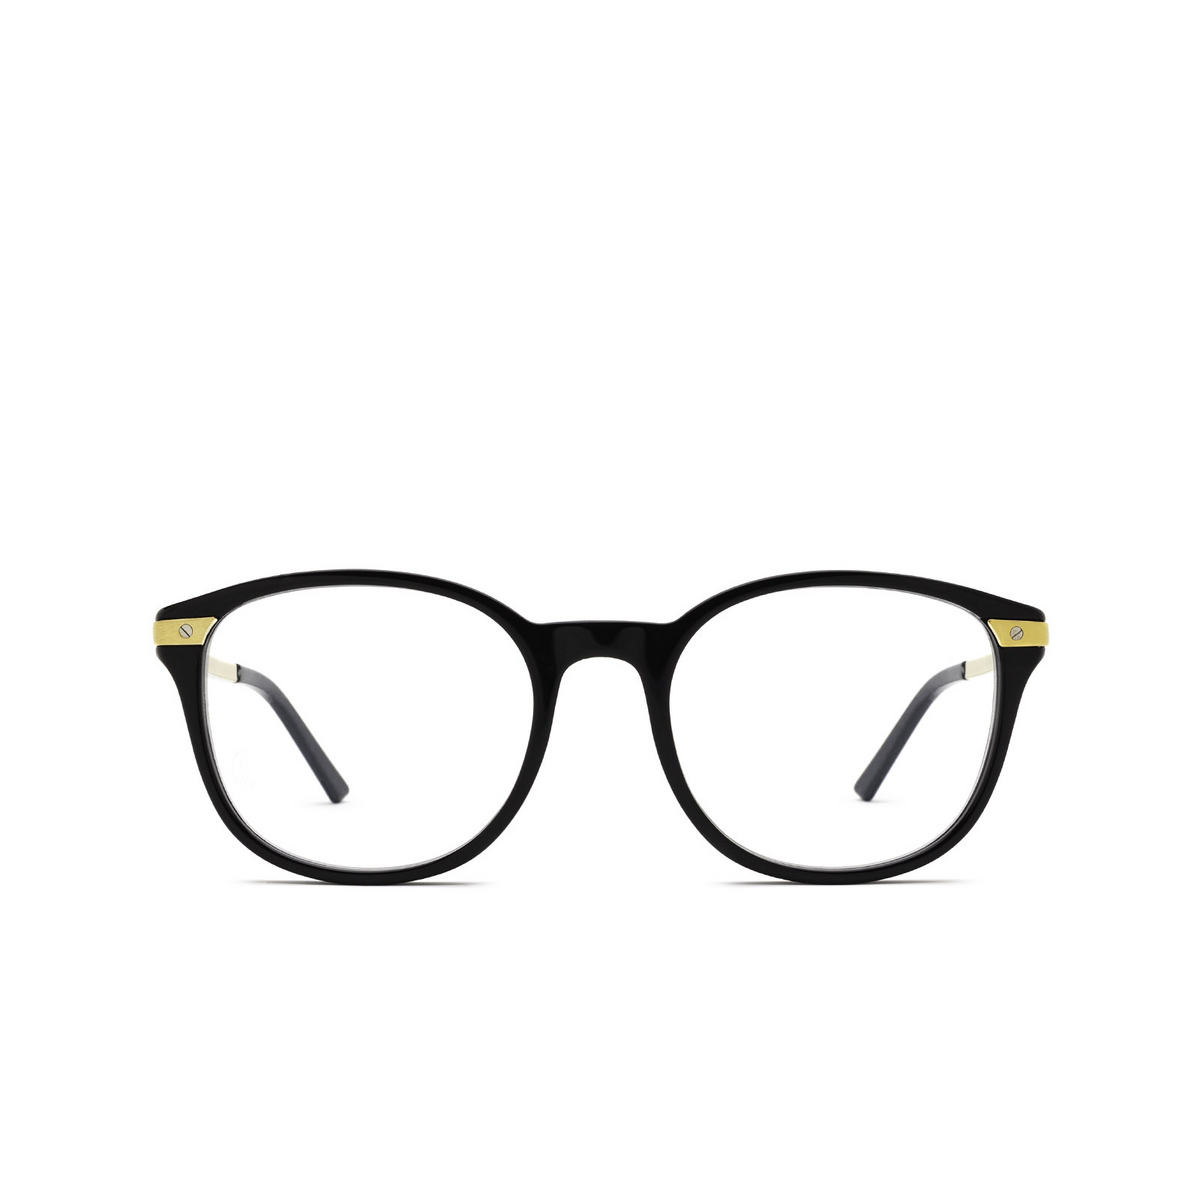 Cartier® Round Eyeglasses: CT0107O color Black 001 - front view.